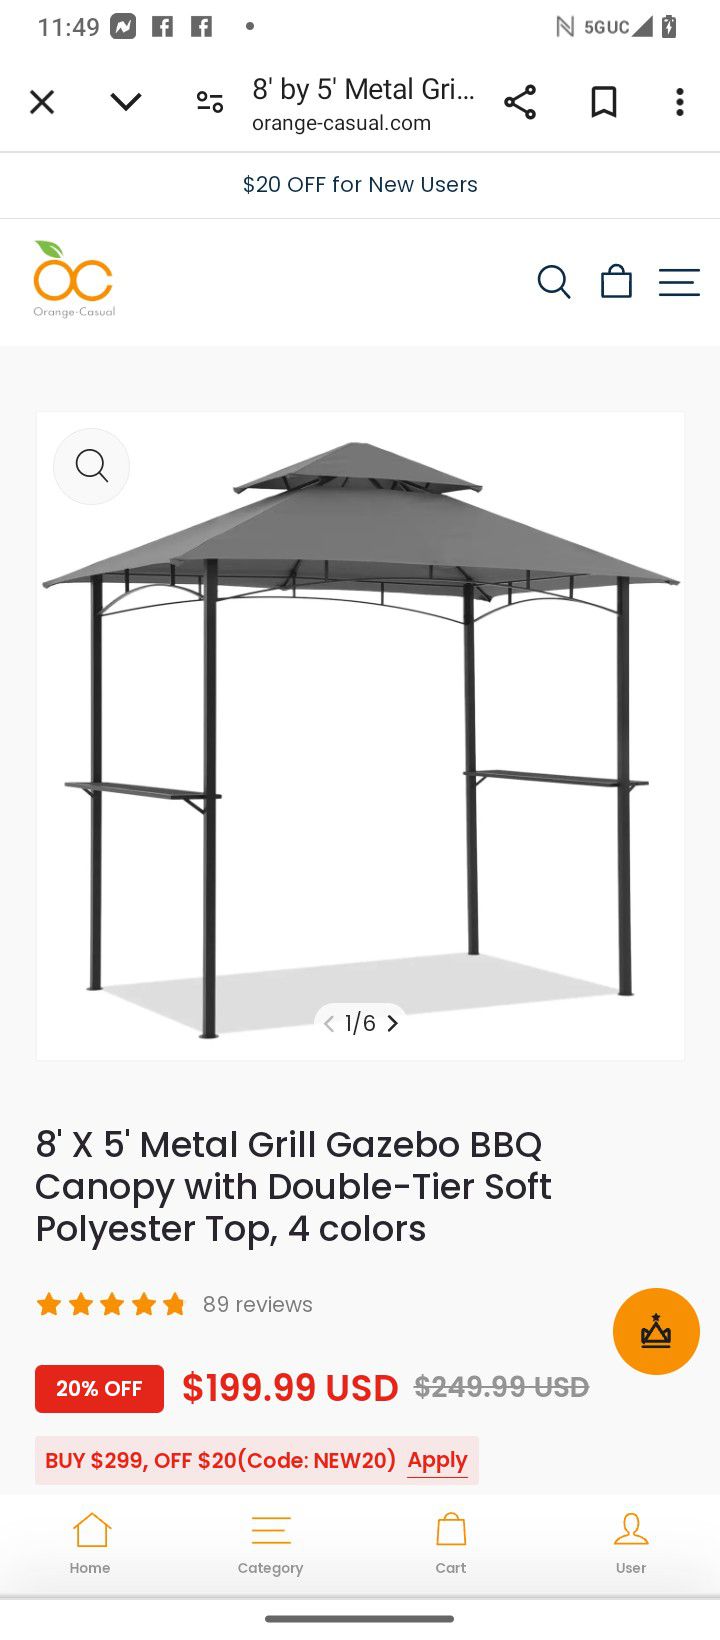 8.5 Grill Gazebo BBQ Canopy With Double Tier Soft Polyester $140